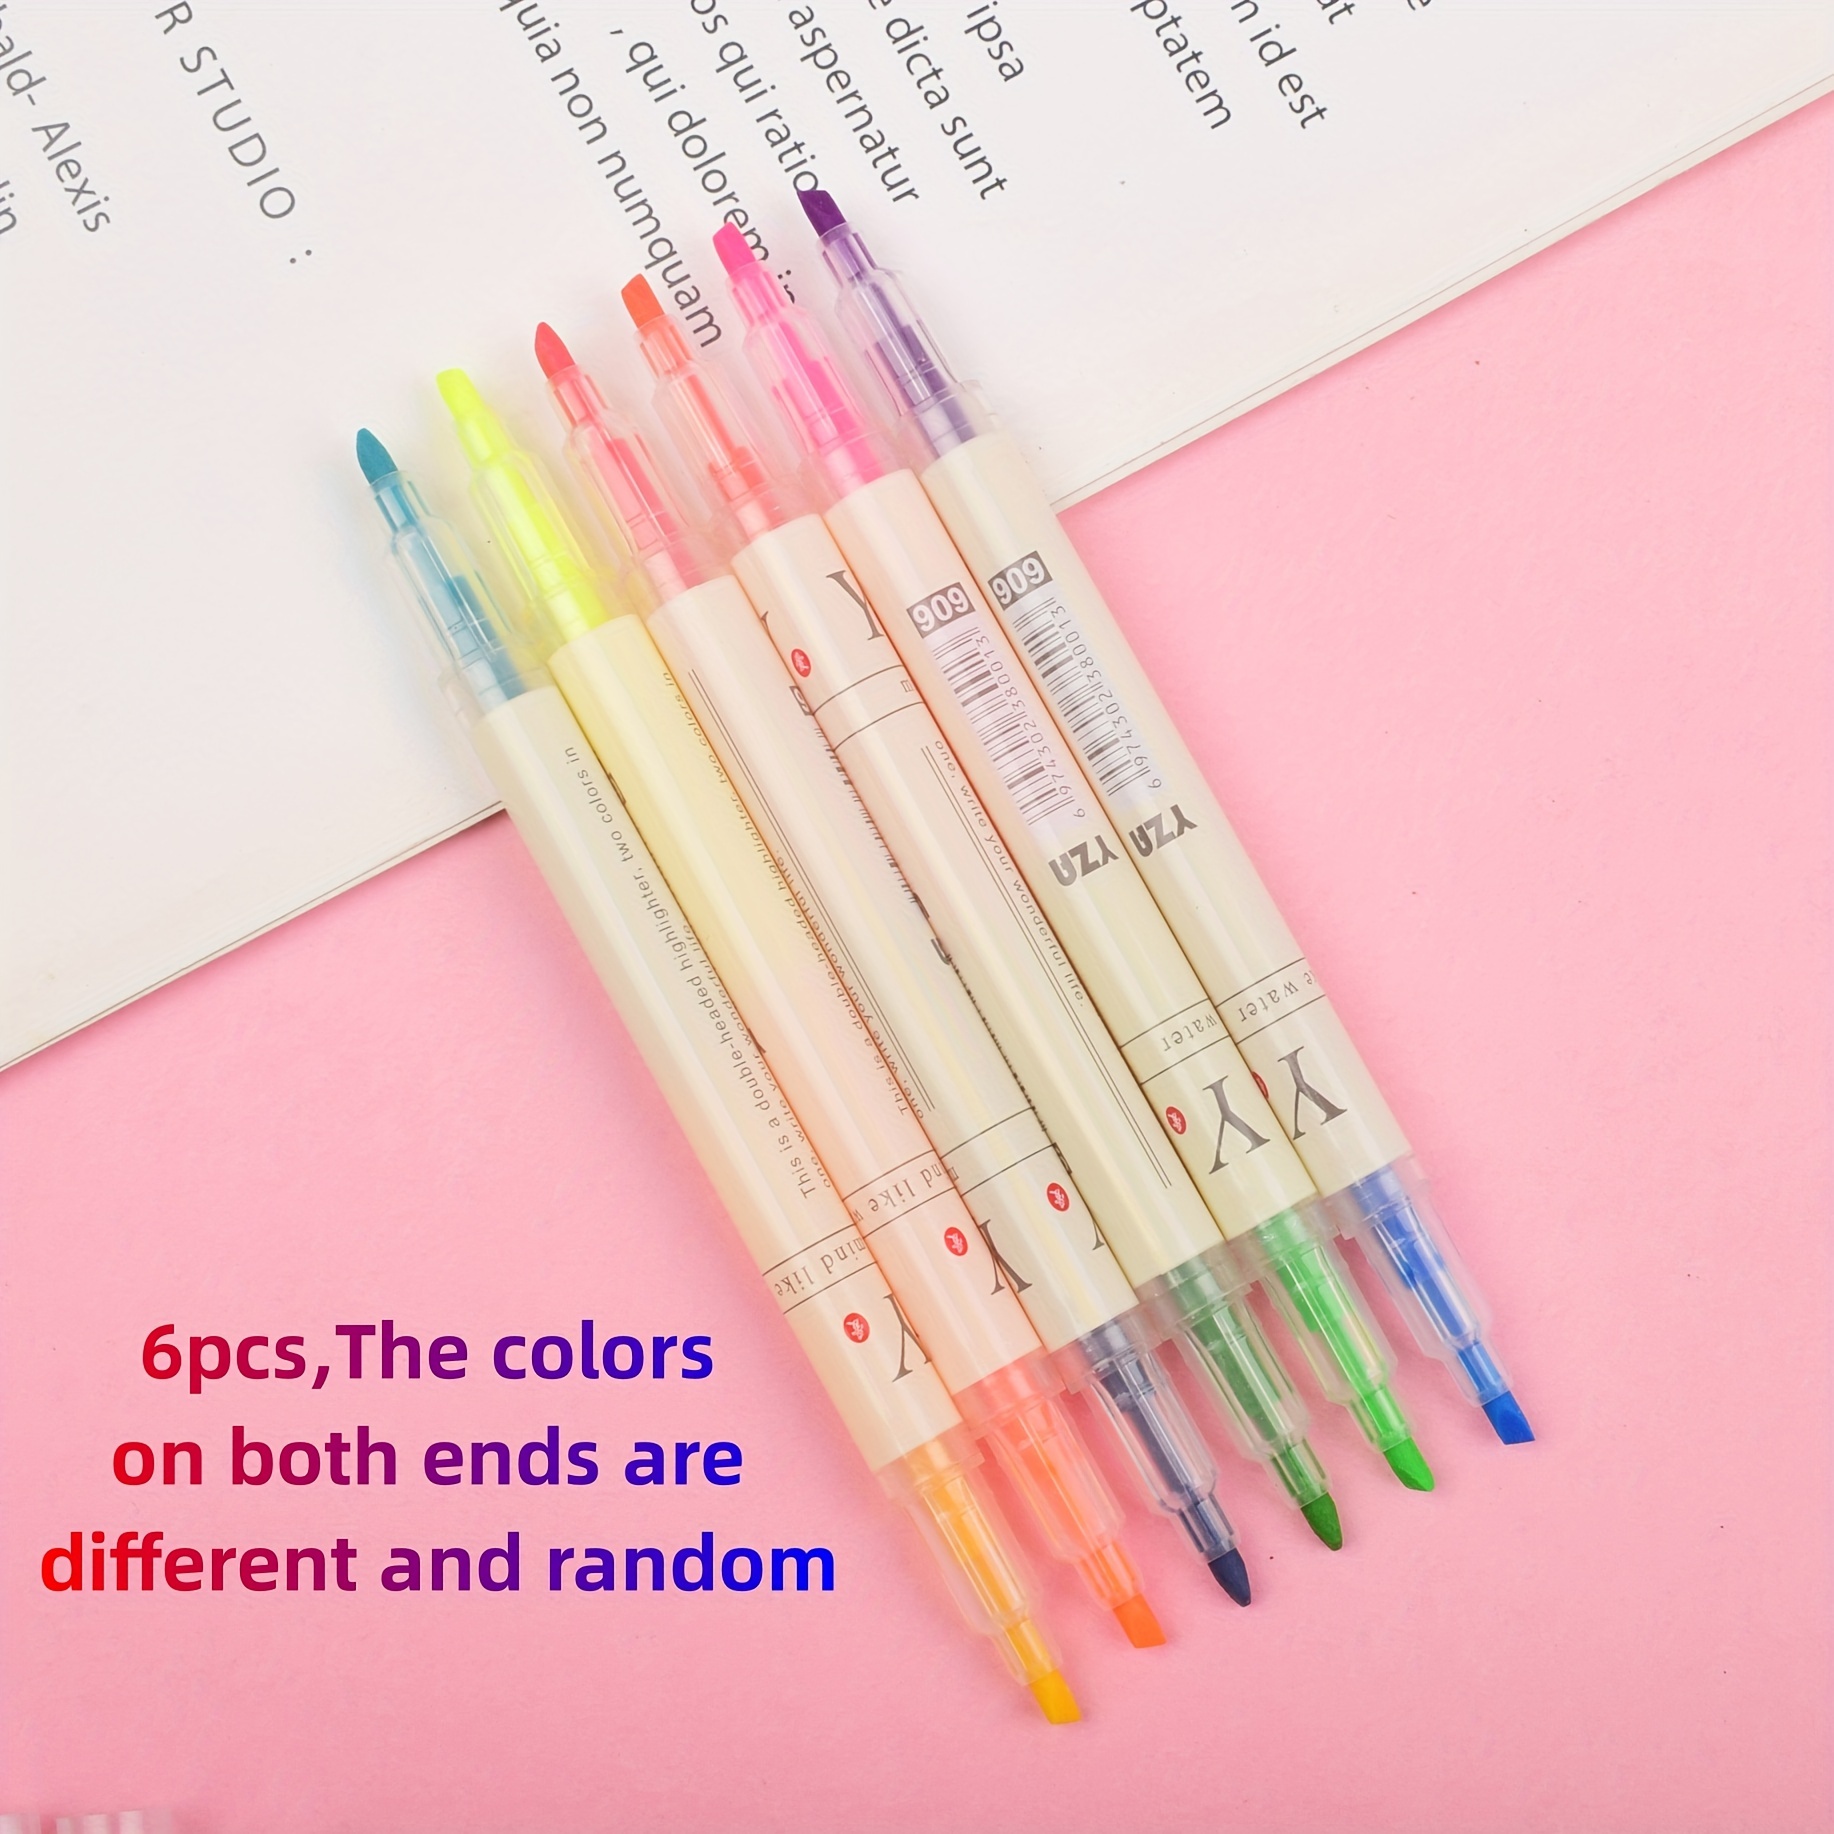 5 Colors/box Double Headed Highlighter Pen Set Fluorescent Markers  Highlighters Pens Art Marker Japanese Cute Kawaii Stationery,For School  students take notes